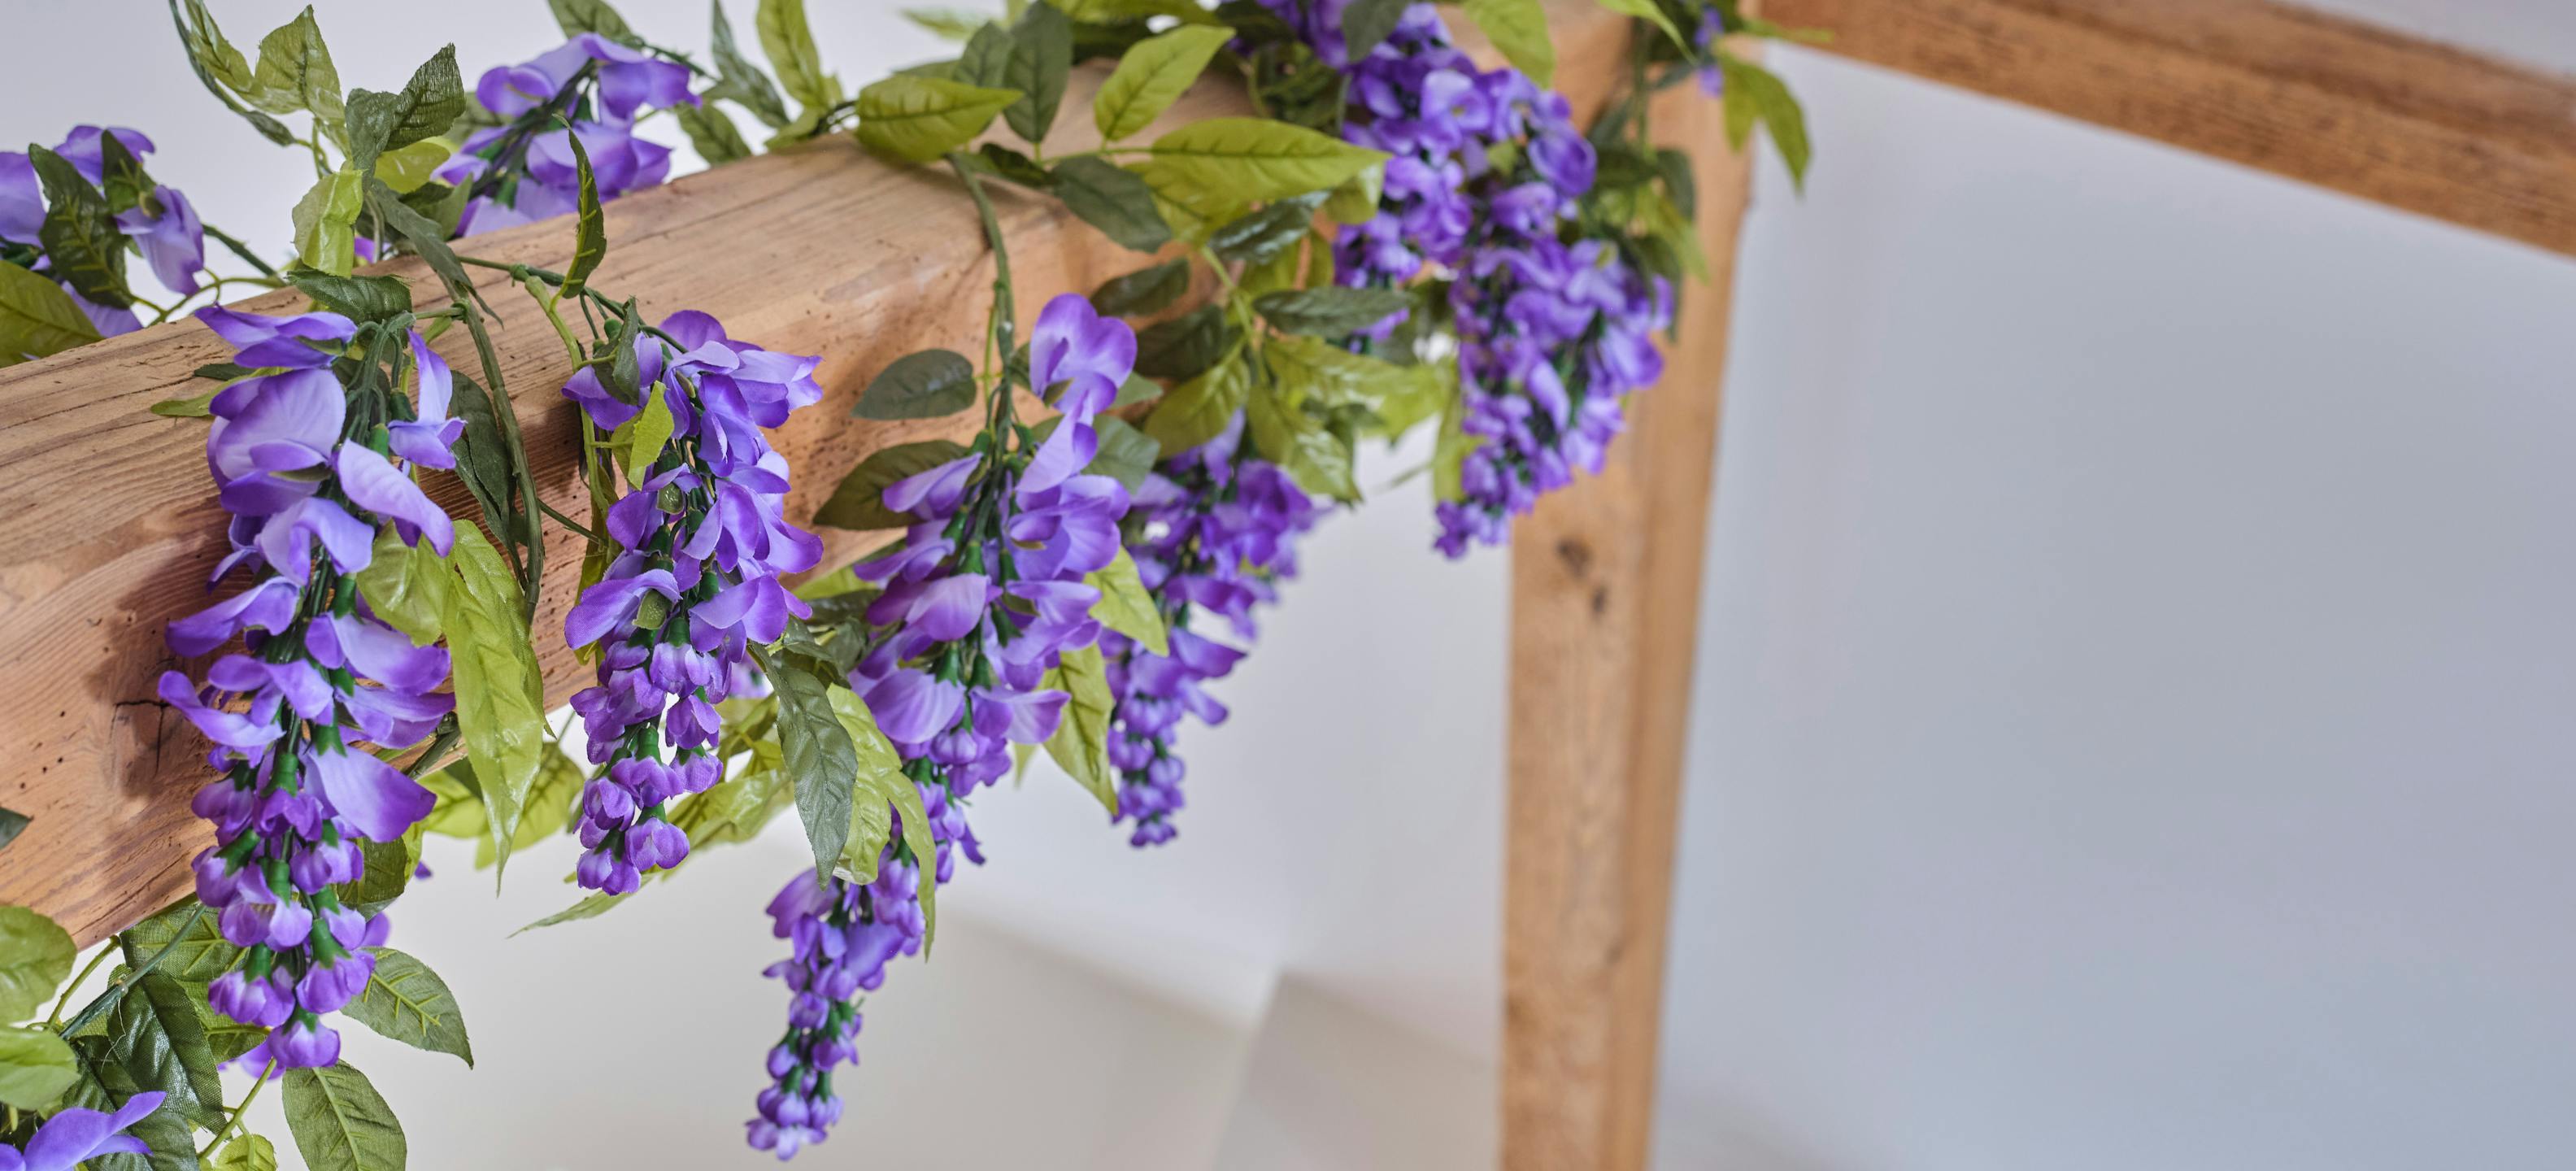 Purple artificial wisteria garland by Blooming Artificial wrapped around oak beam